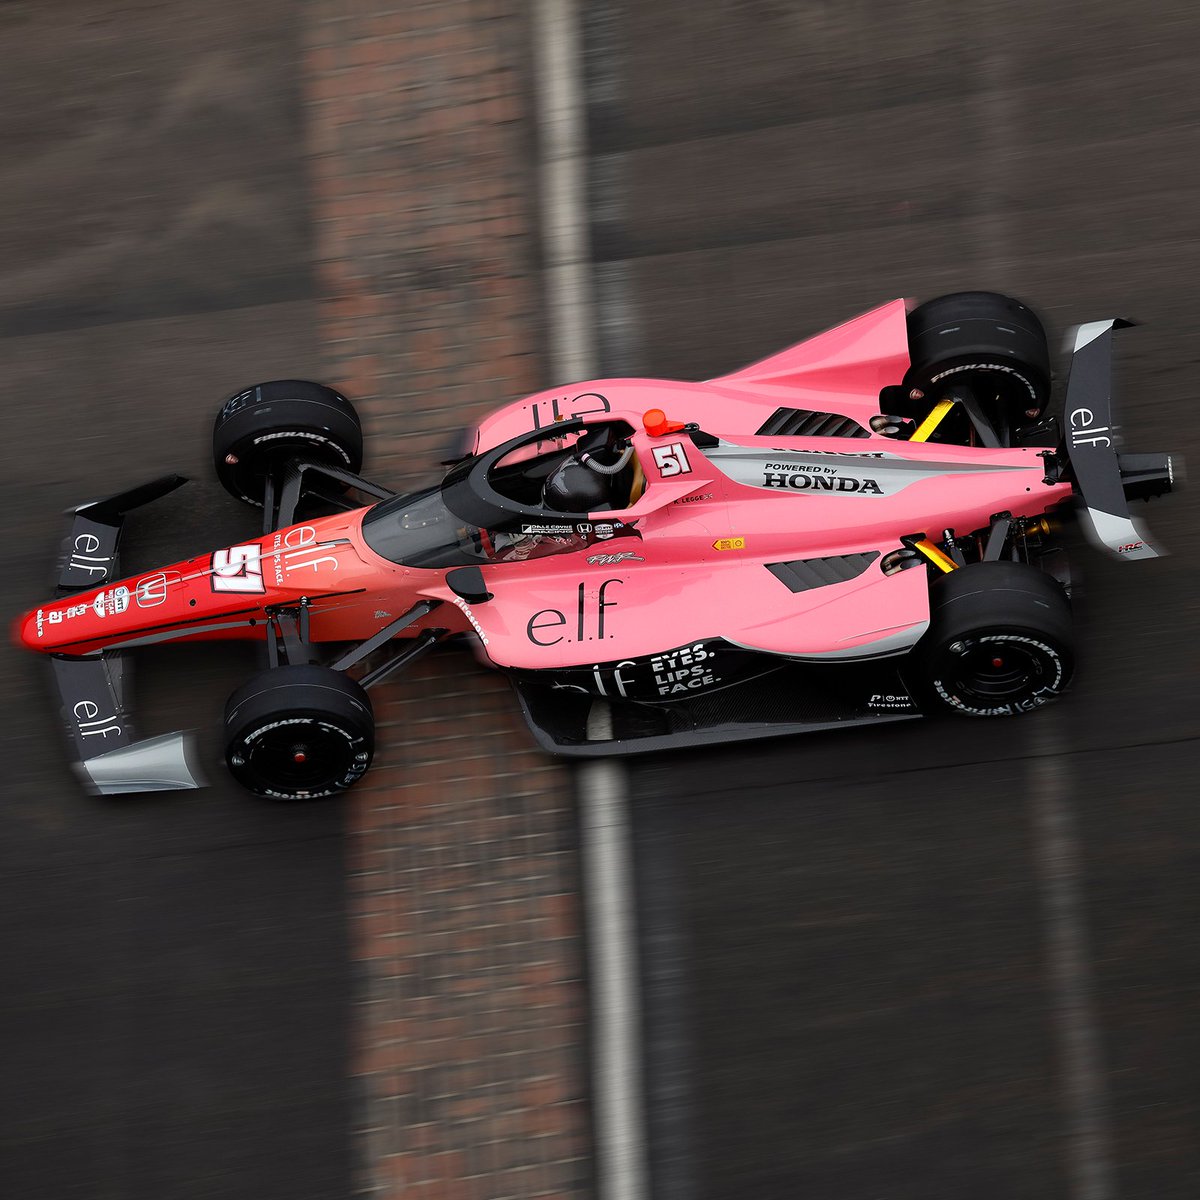 🏁The #Indy500🏁 is ALMOST HERE! We're so e.l.f.ing excited to be backing the ONLY female driver, @katherinelegge! 💪 We'll be cheering her on this Sunday @IMS! 🏎️💨 Will you be watching? 👀 Stay tuned for coverage all weekend long! 💖